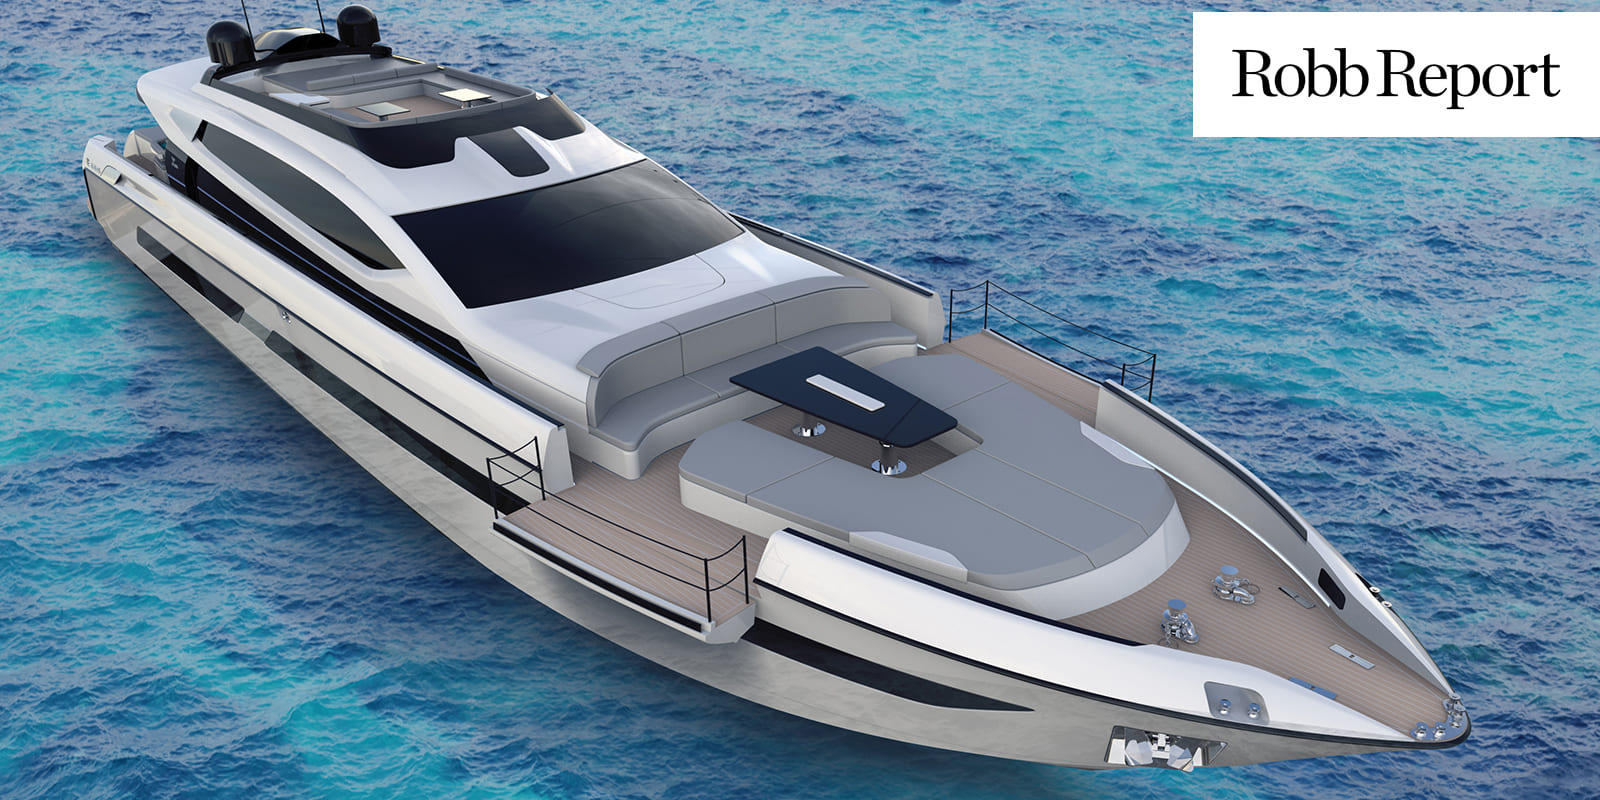 New 115-Foot Superyacht Can Reach a Blistering 44 Knots on the Water